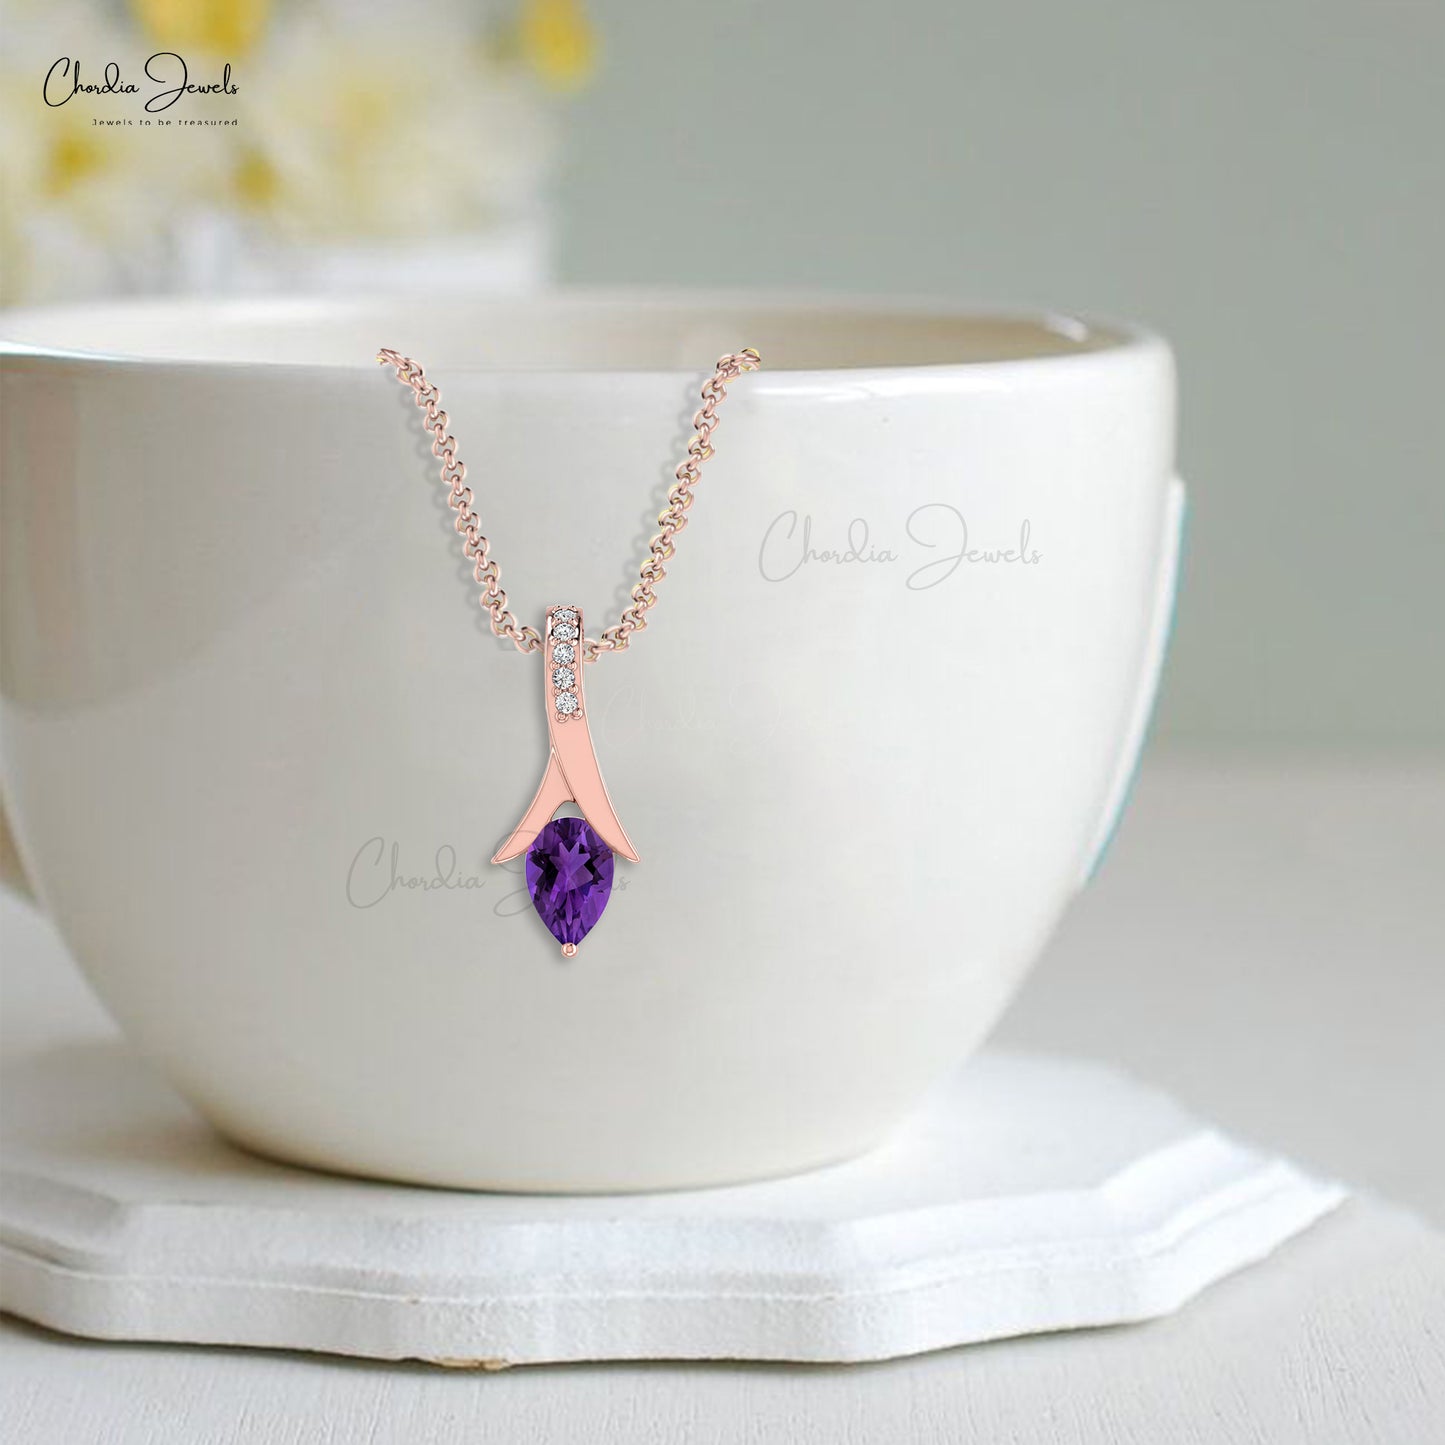 Natural Amethyst Tear Drop Pendant 14k Solid Gold White Diamond Pendant 6X4mm Pear Cut Gemstone Jewelry For Birthday Gift